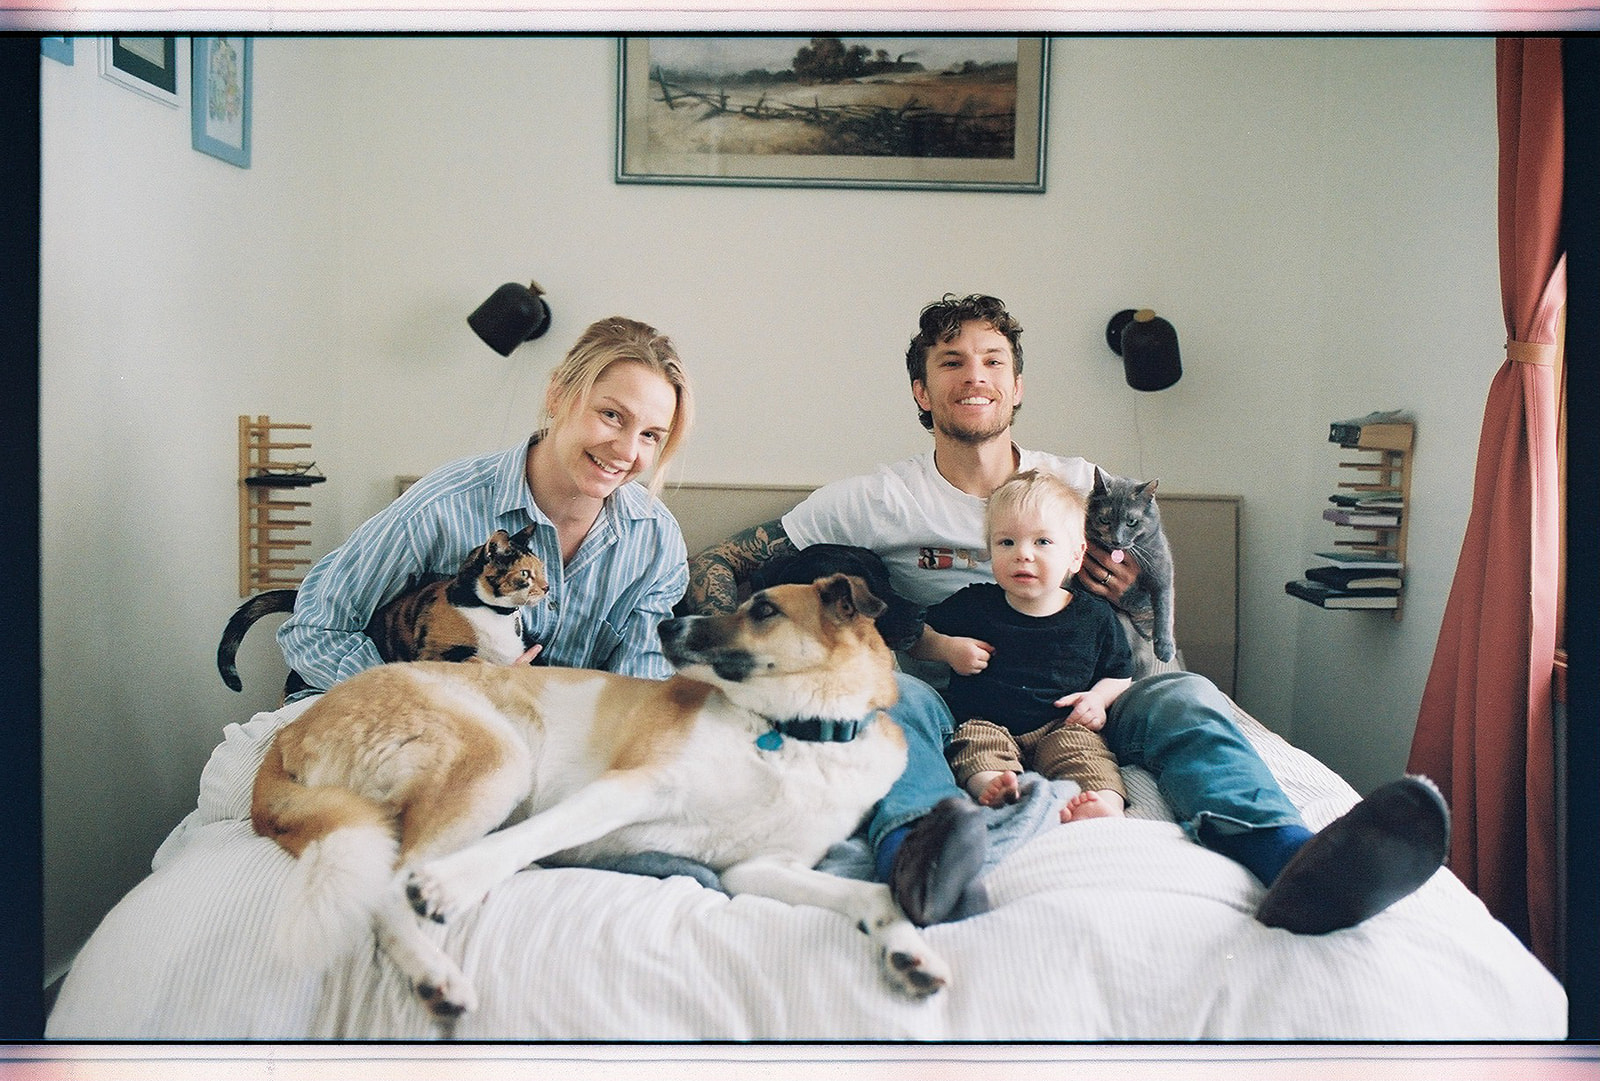 kelowna family film and documentary family photography at home, 35mm film, cuddles, baby bump maternity